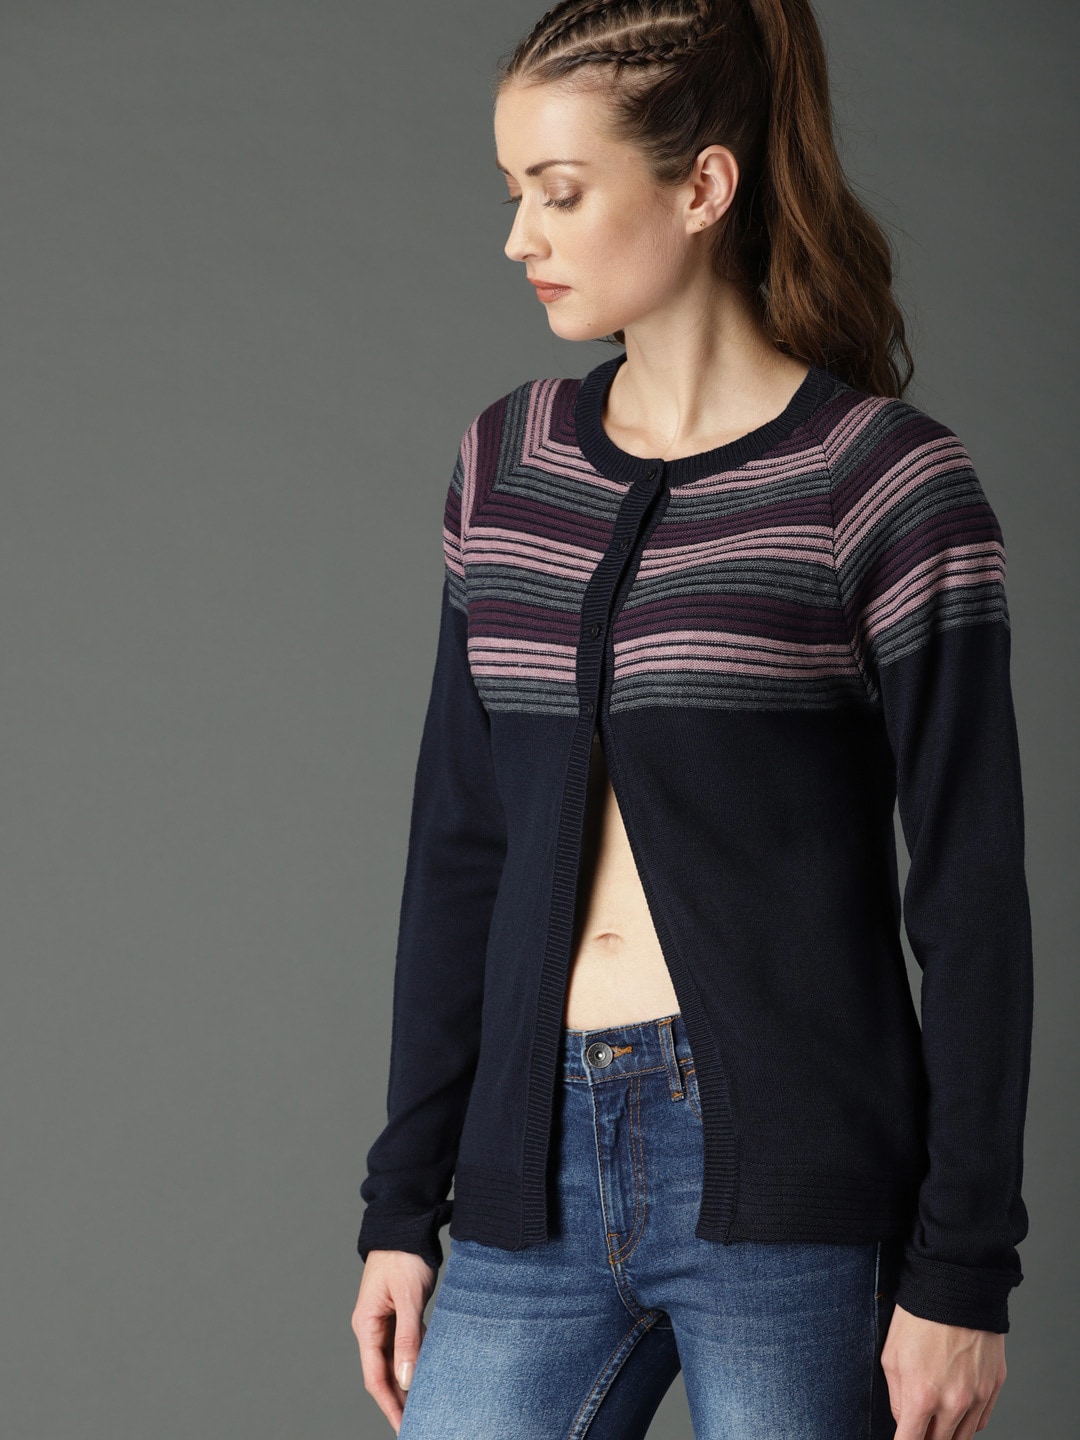 Roadster Women Navy Blue Striped Cardigan Price in India